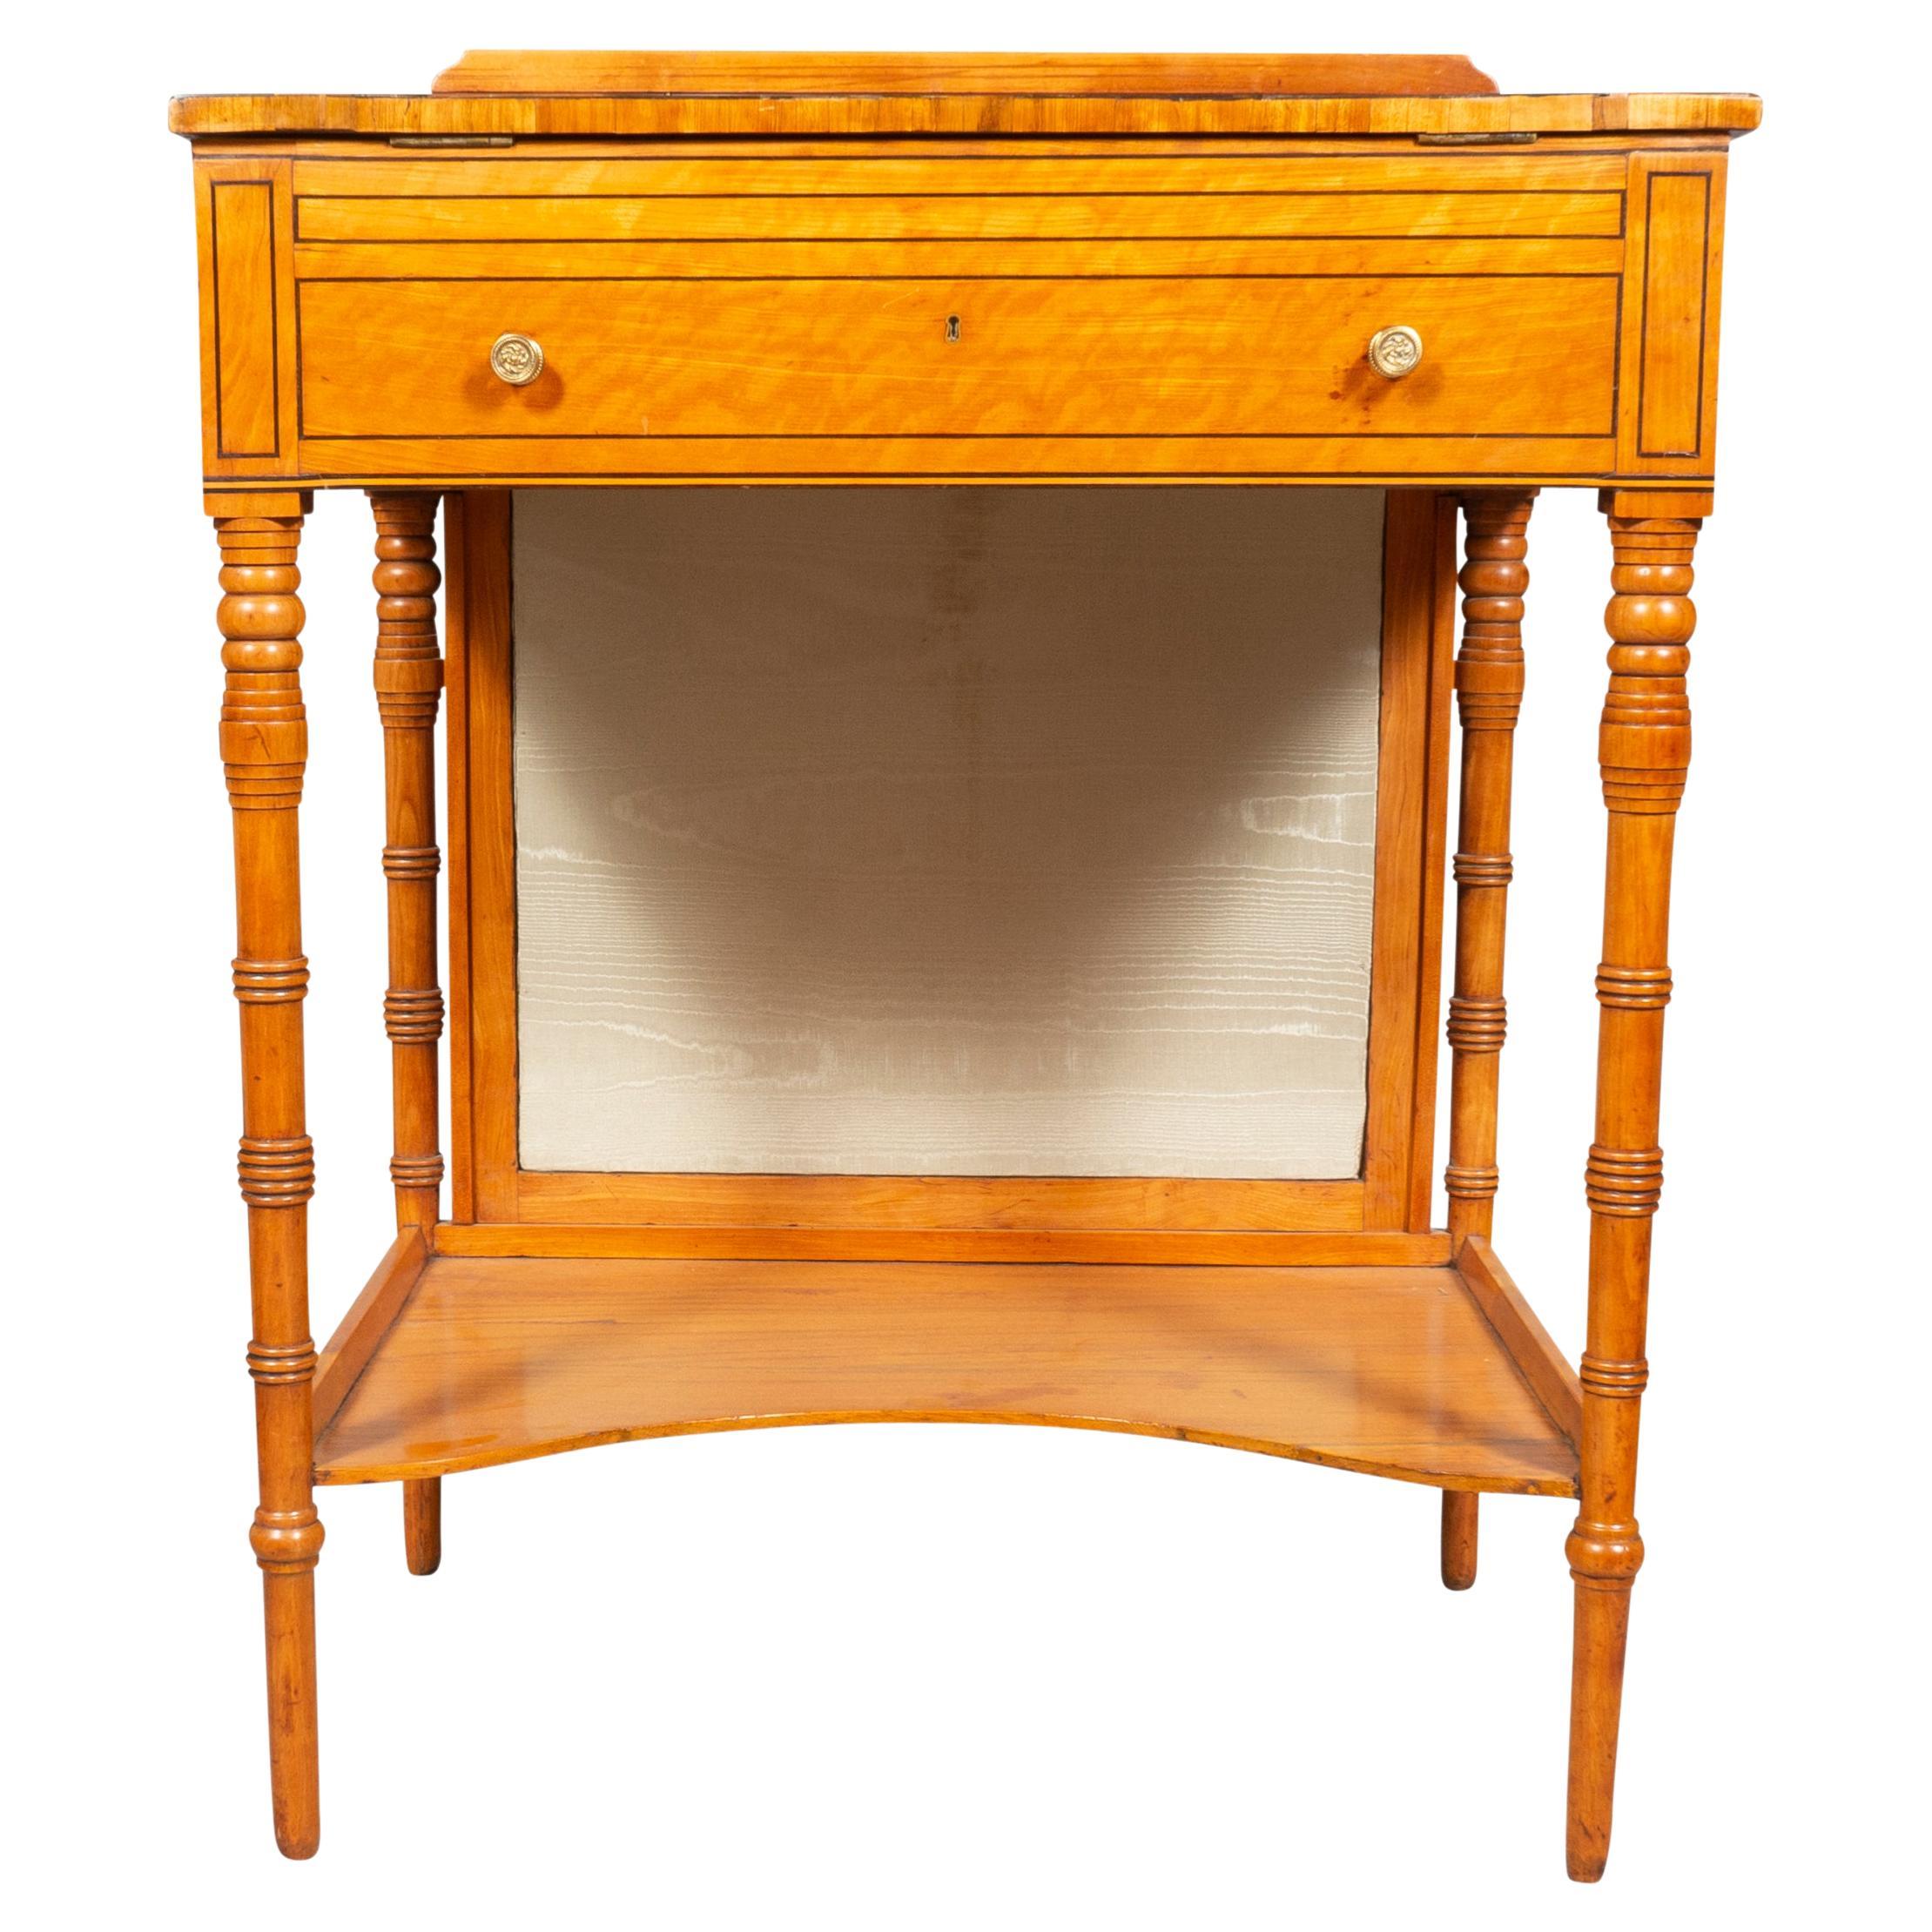 Rectangular  adjustable top with removable book holder. Adjustable fire screen and drawer and slide. Lower shelf joining circular bamboo turned tapered legs.
With Hyde Park Antiques. NYC.